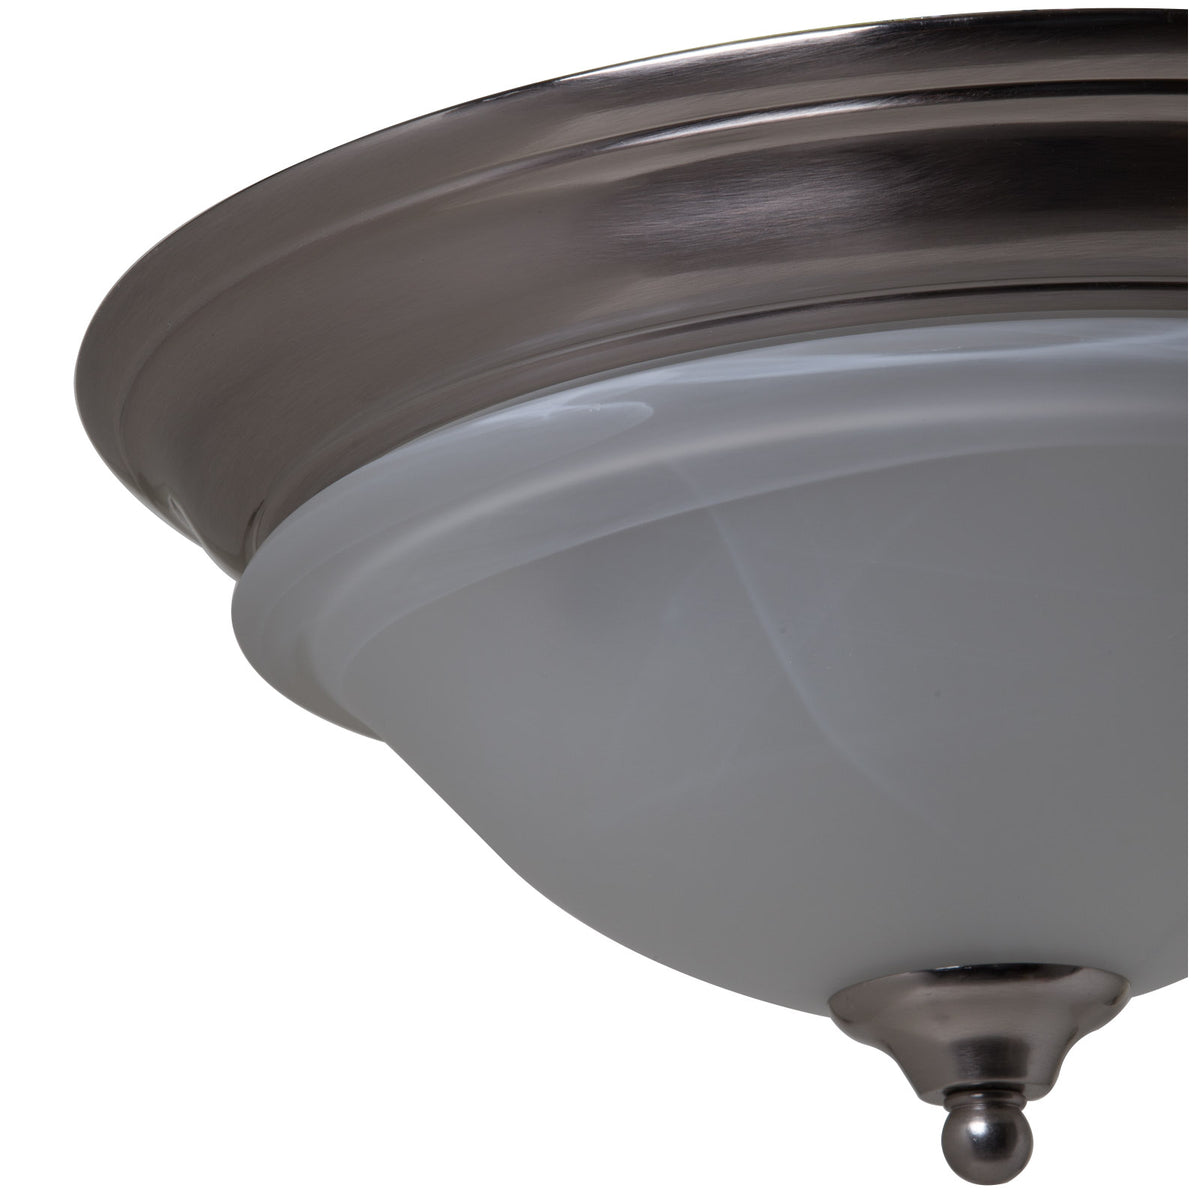 buy ceiling light fixtures at cheap rate in bulk. wholesale & retail lighting goods & supplies store. home décor ideas, maintenance, repair replacement parts